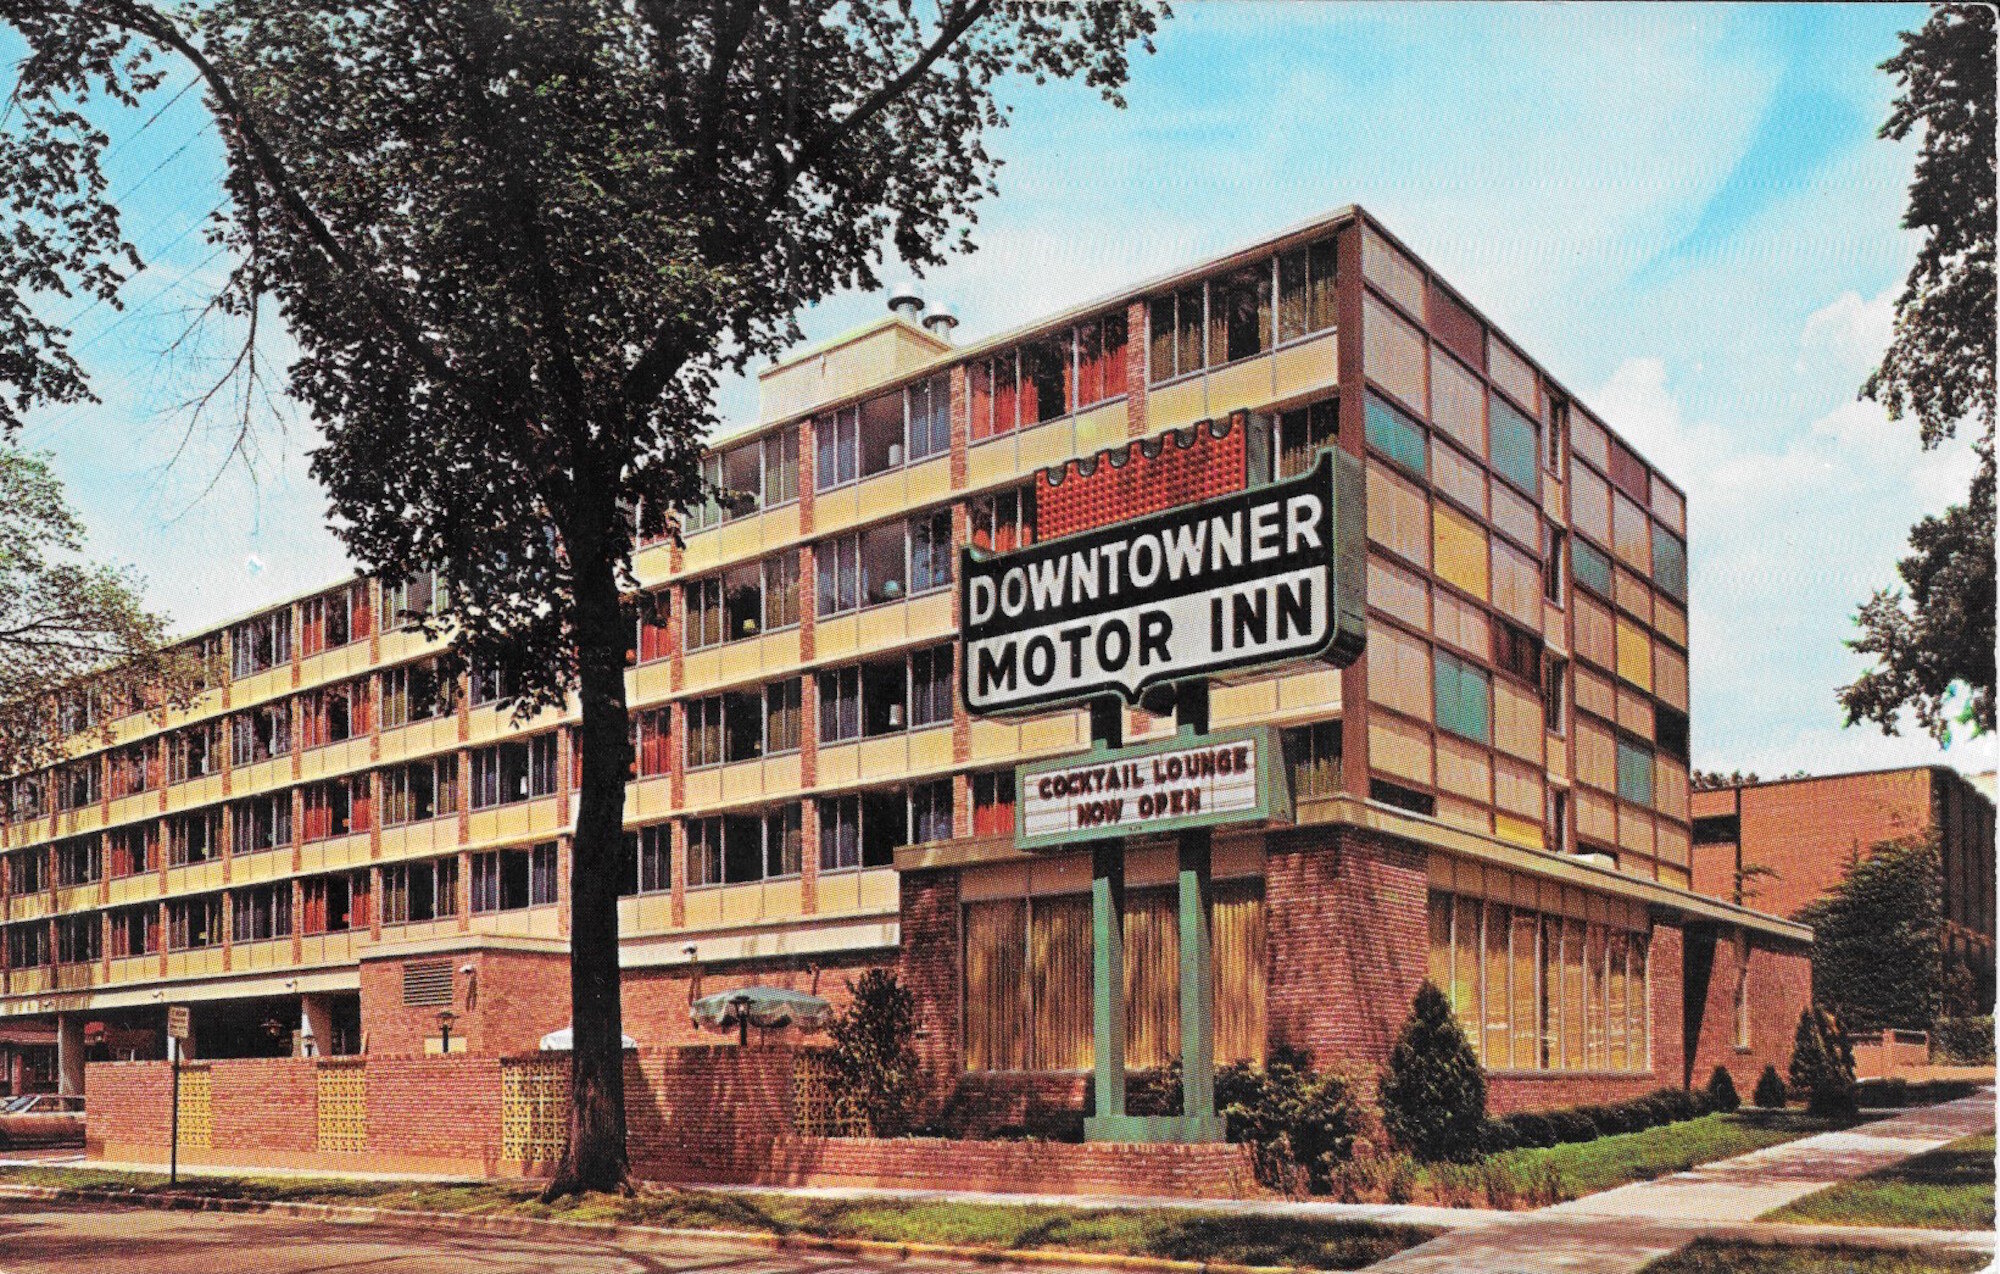  Breeze block panels alternate with bricks to enclose a courtyard (left) at the 1960s Downtowner Motor Inn at Broom Street and W. Washington Avenue. Repurposed as Metropolitan Apartments, the building retains its breeze blocks. (Postcard: Collection 